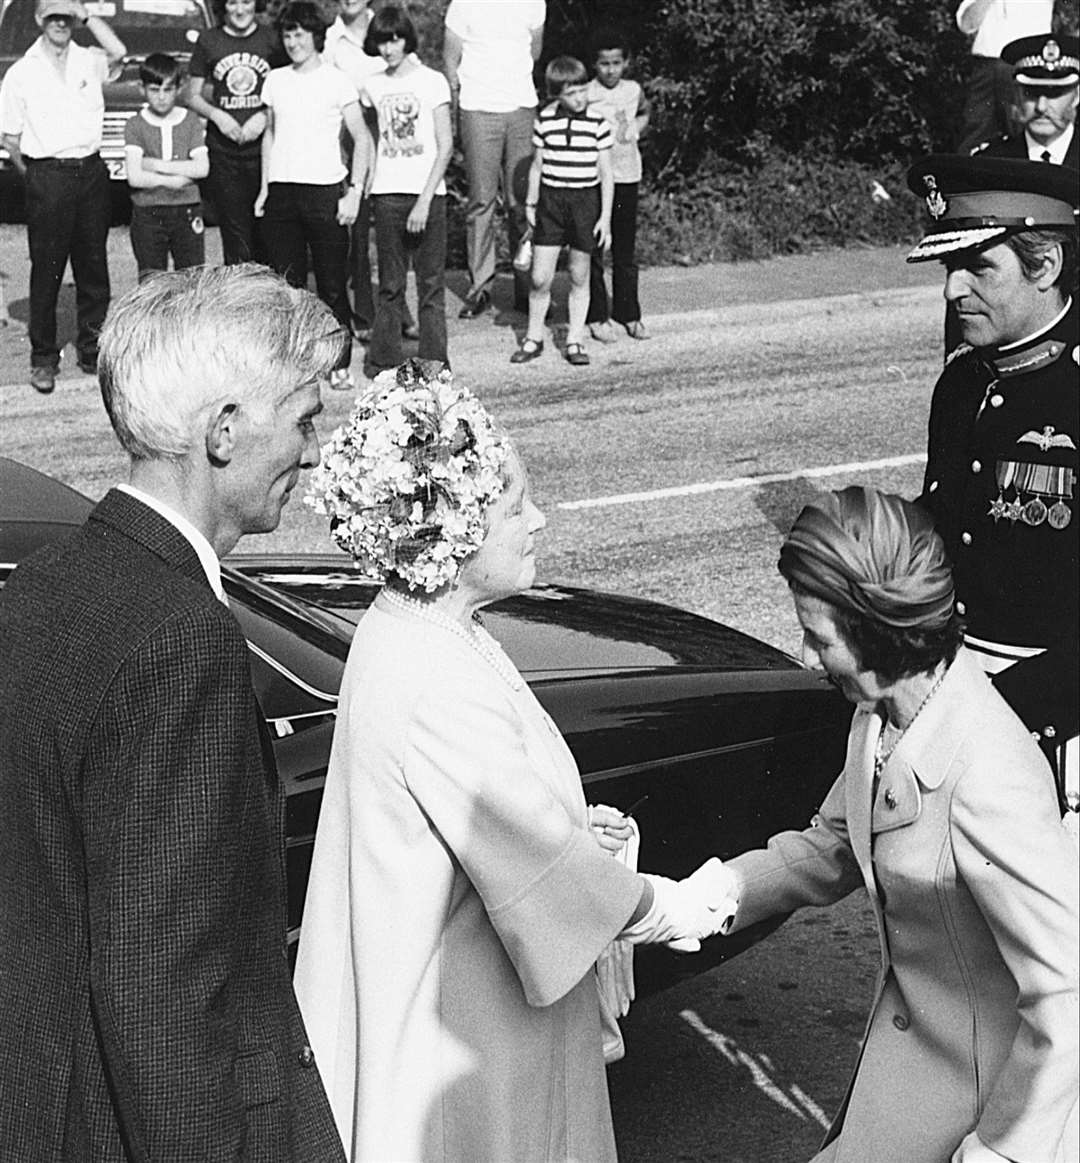 A royal occasion at Watten in 1973 as the Queen Mother arrives to open the new hall. She was welcomed by Viscount Thurso, Lord-Lieutenant of the county, and Lady Thurso, and hall committee chairman Douglas Brims (left).